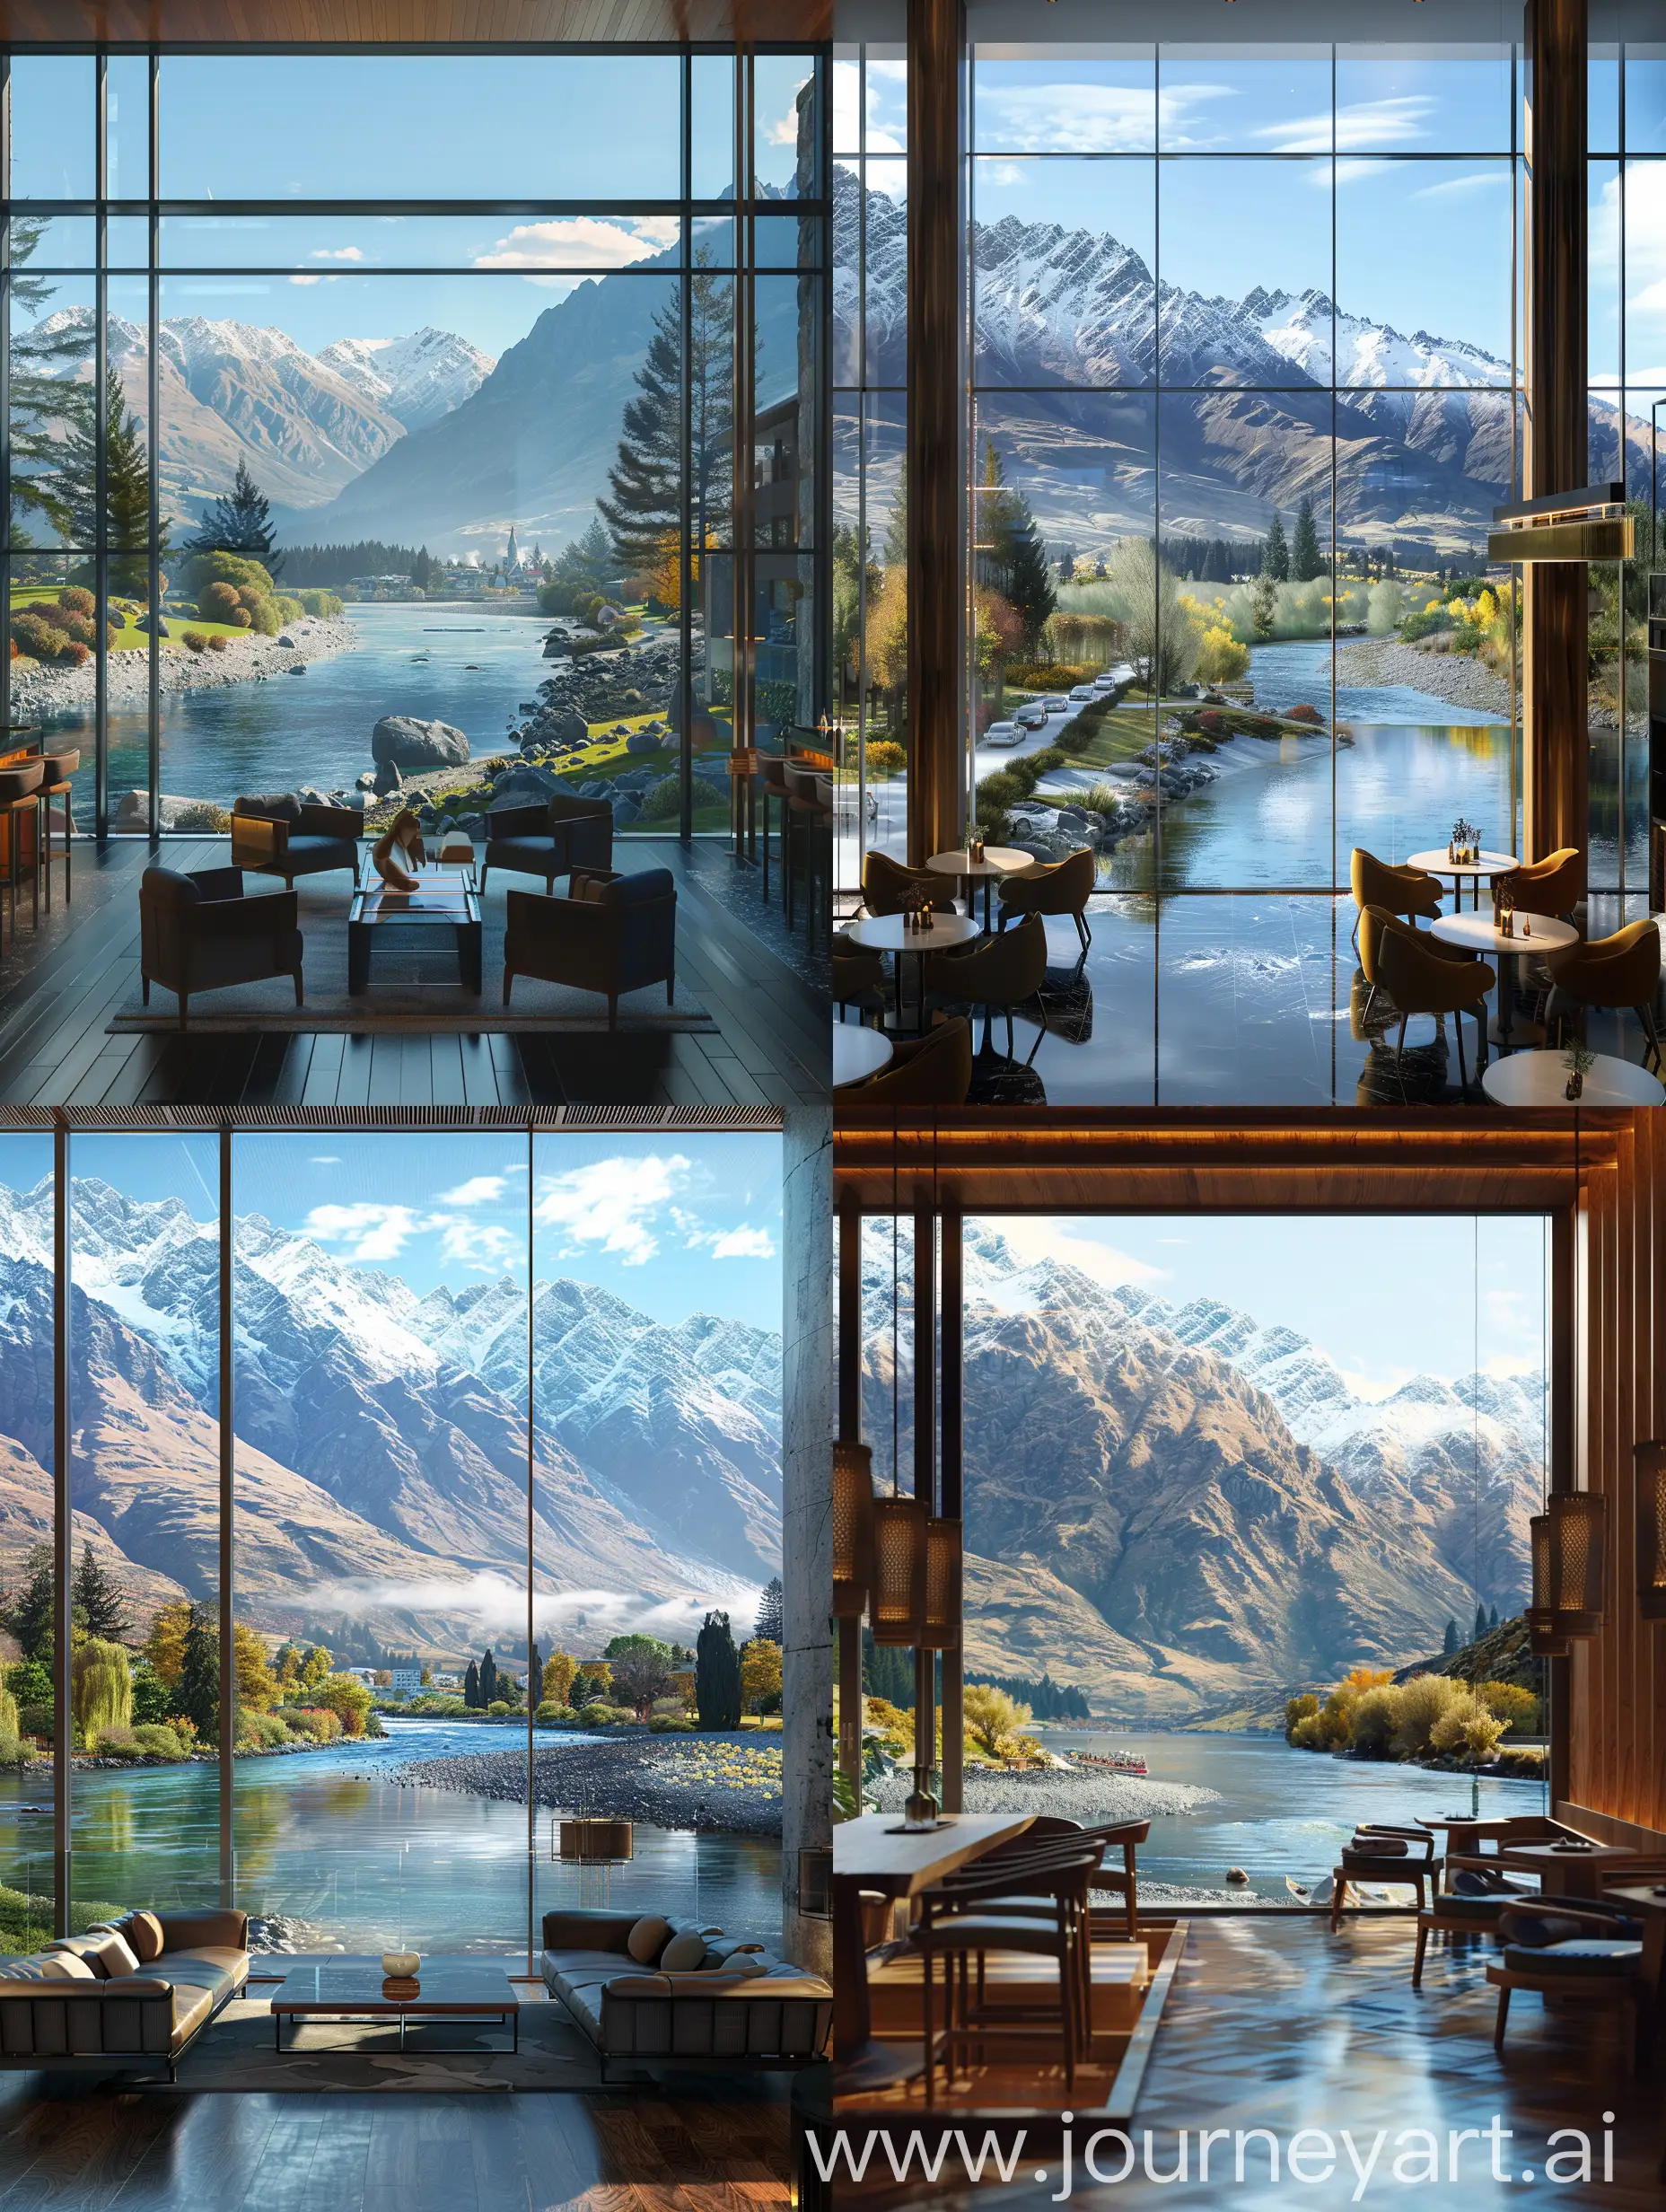 Captivating-Modern-Hotel-Interior-with-River-and-Mountain-Views-in-Queenstown-New-Zealand